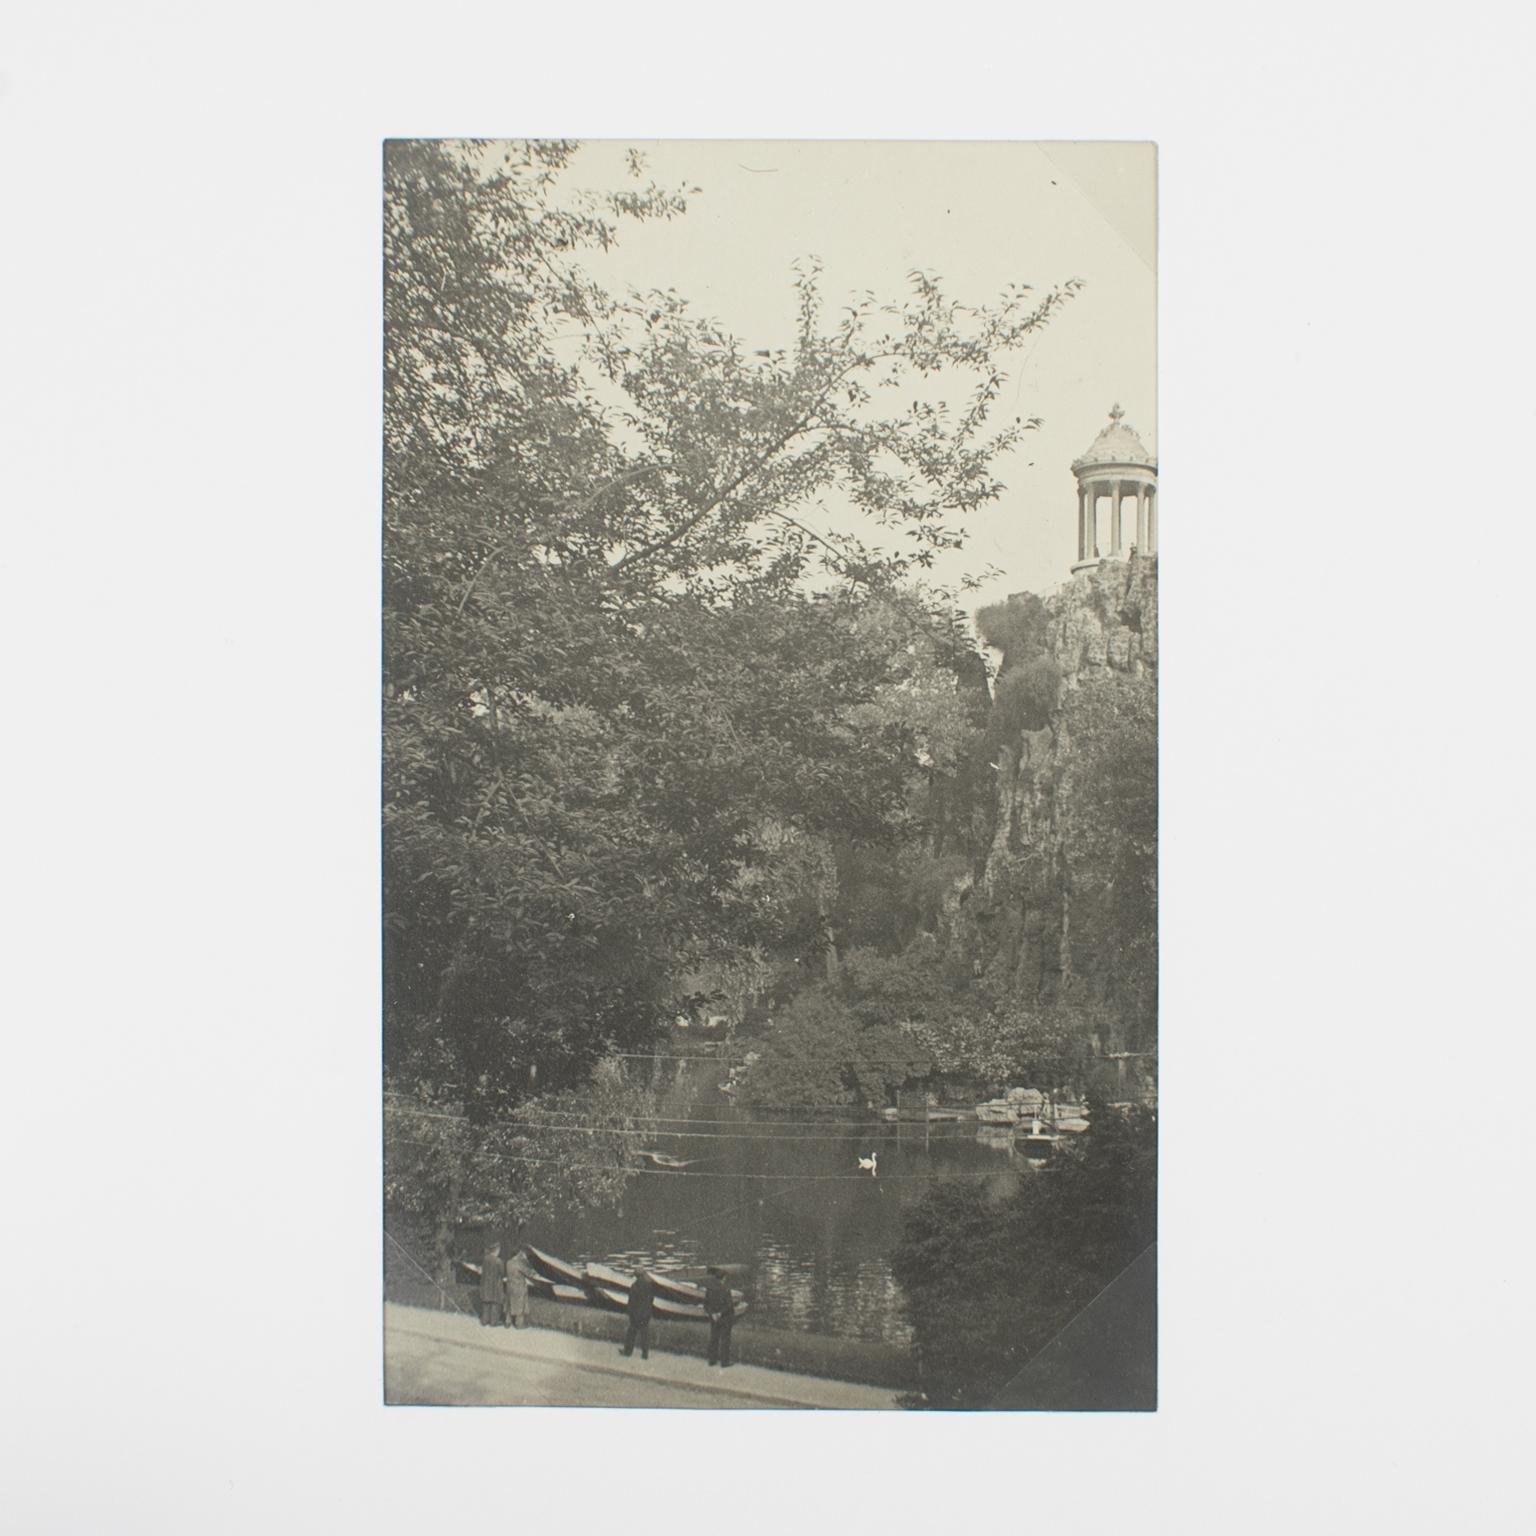 Paris, The Buttes Chaumont Park 1930, Silver Gelatin Black and White Photography - Gray Landscape Photograph by Unknown